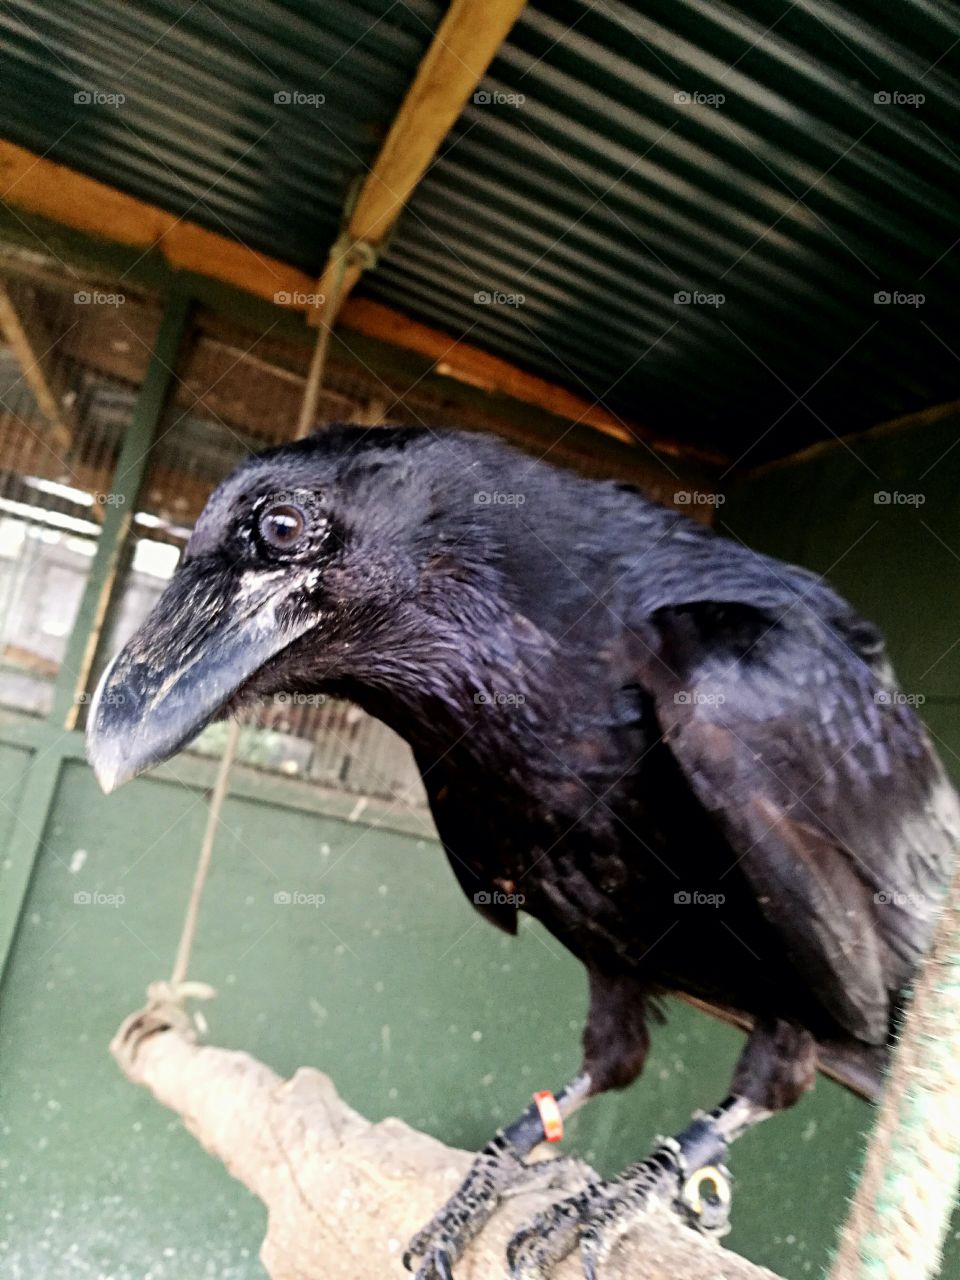 Crow looking at his reflection in the camera lens